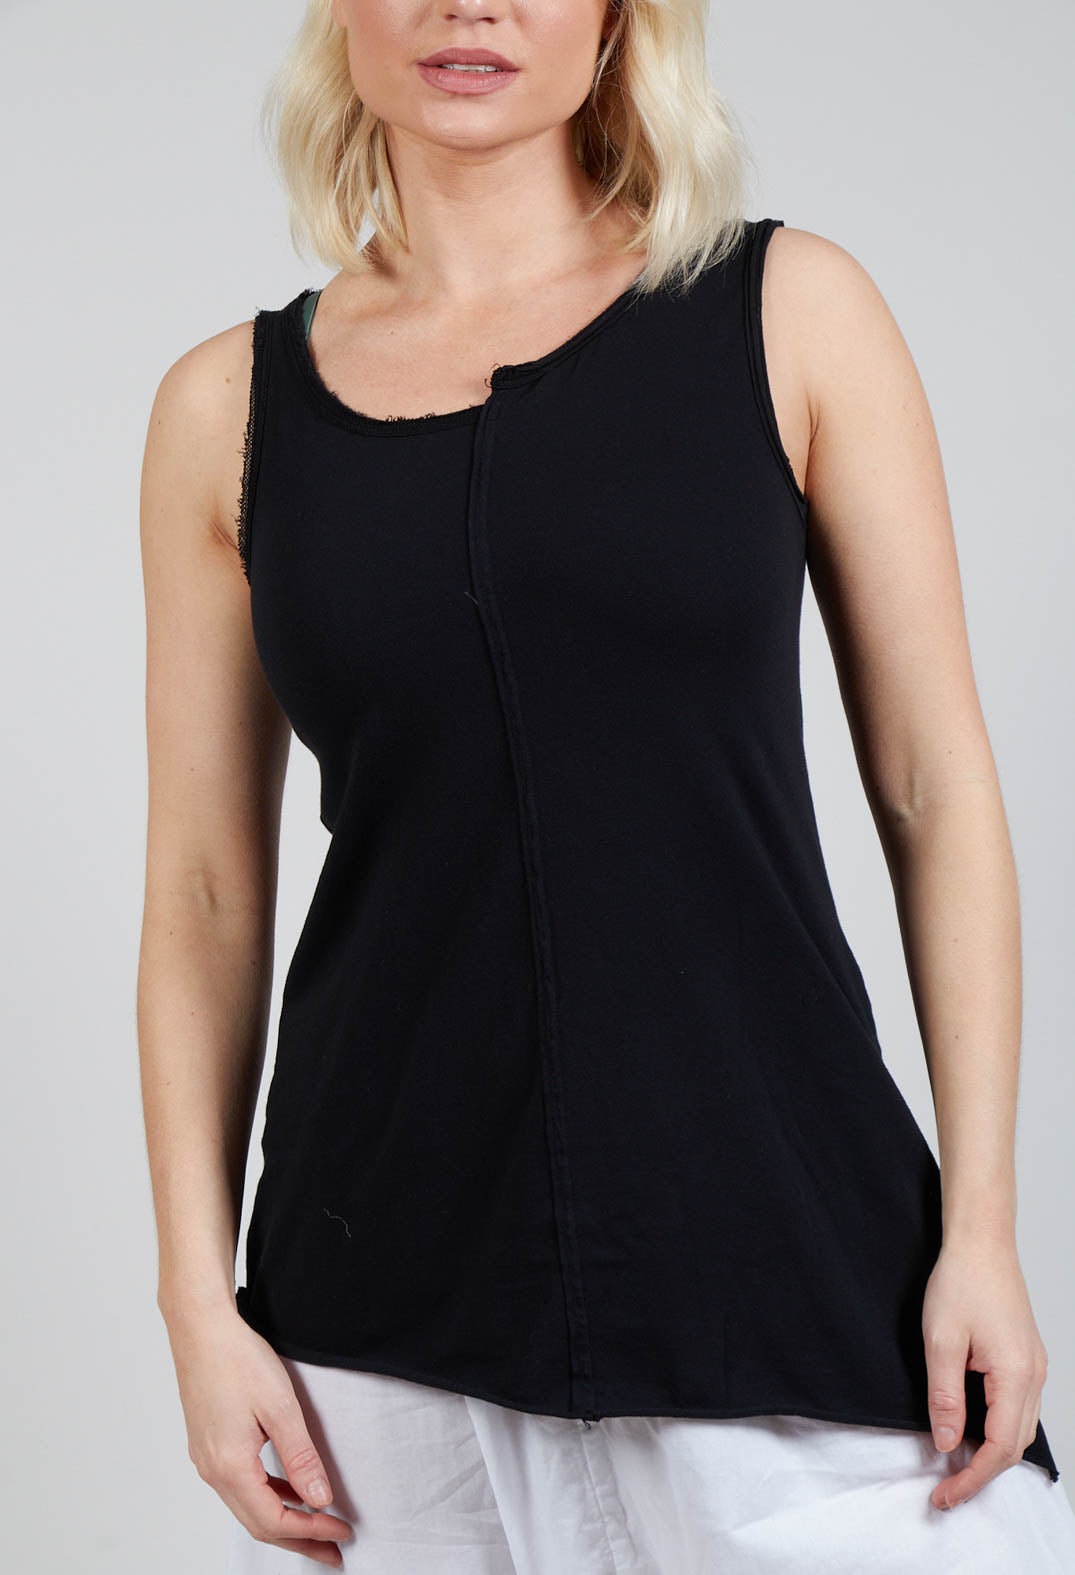 T-Shirt Overlay Top in Black